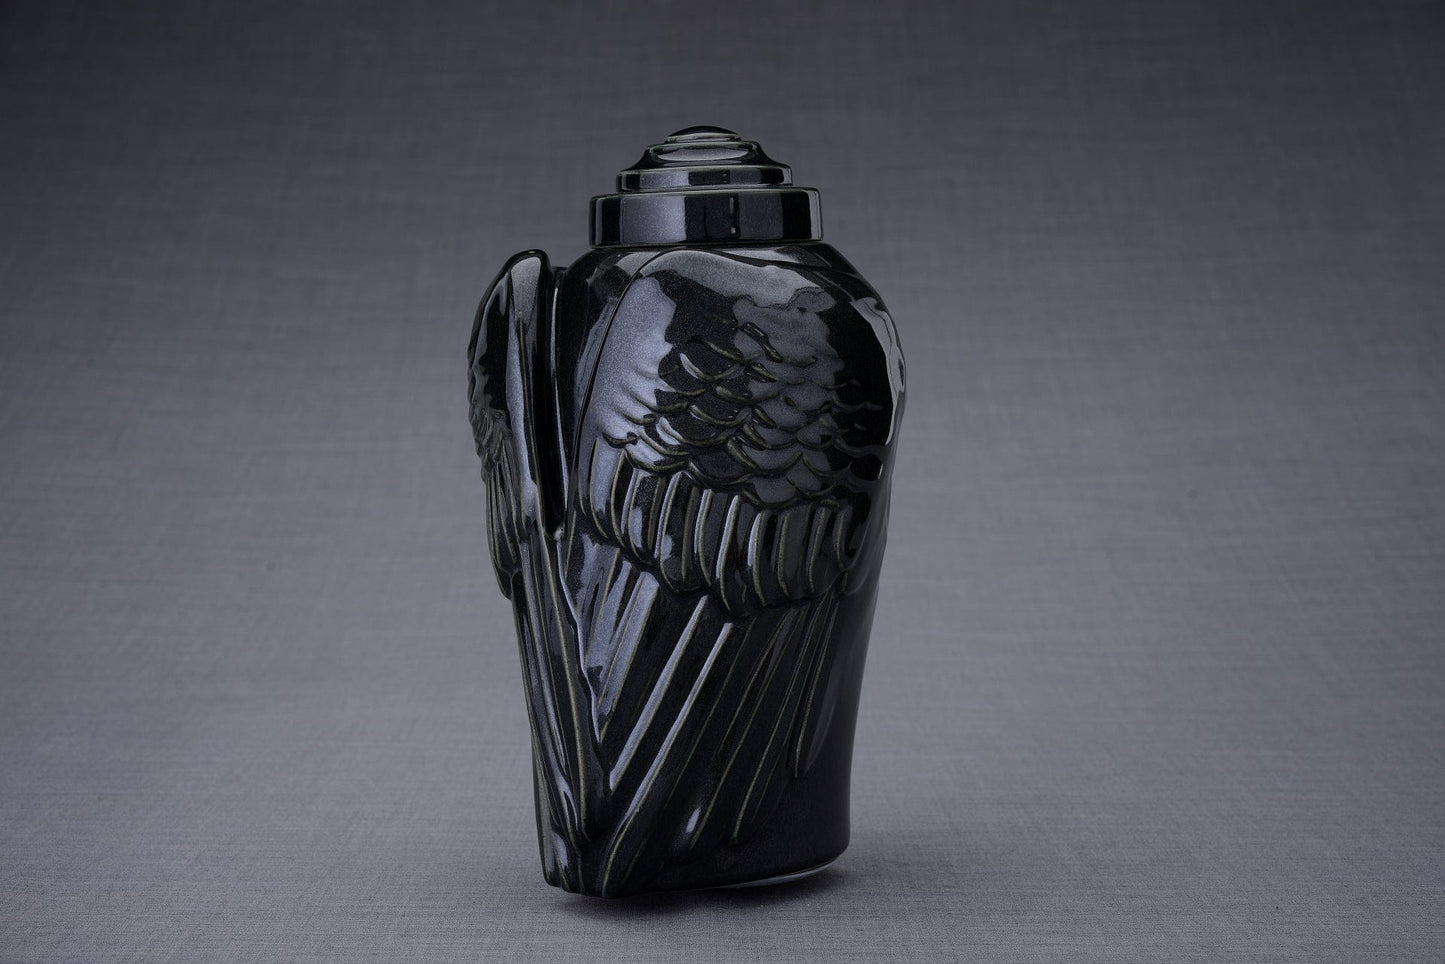 Pulvis Art Urns Adult Size Urn Handmade Cremation Urn for Ashes "Wings" - Large | Black Gloss | Ceramic